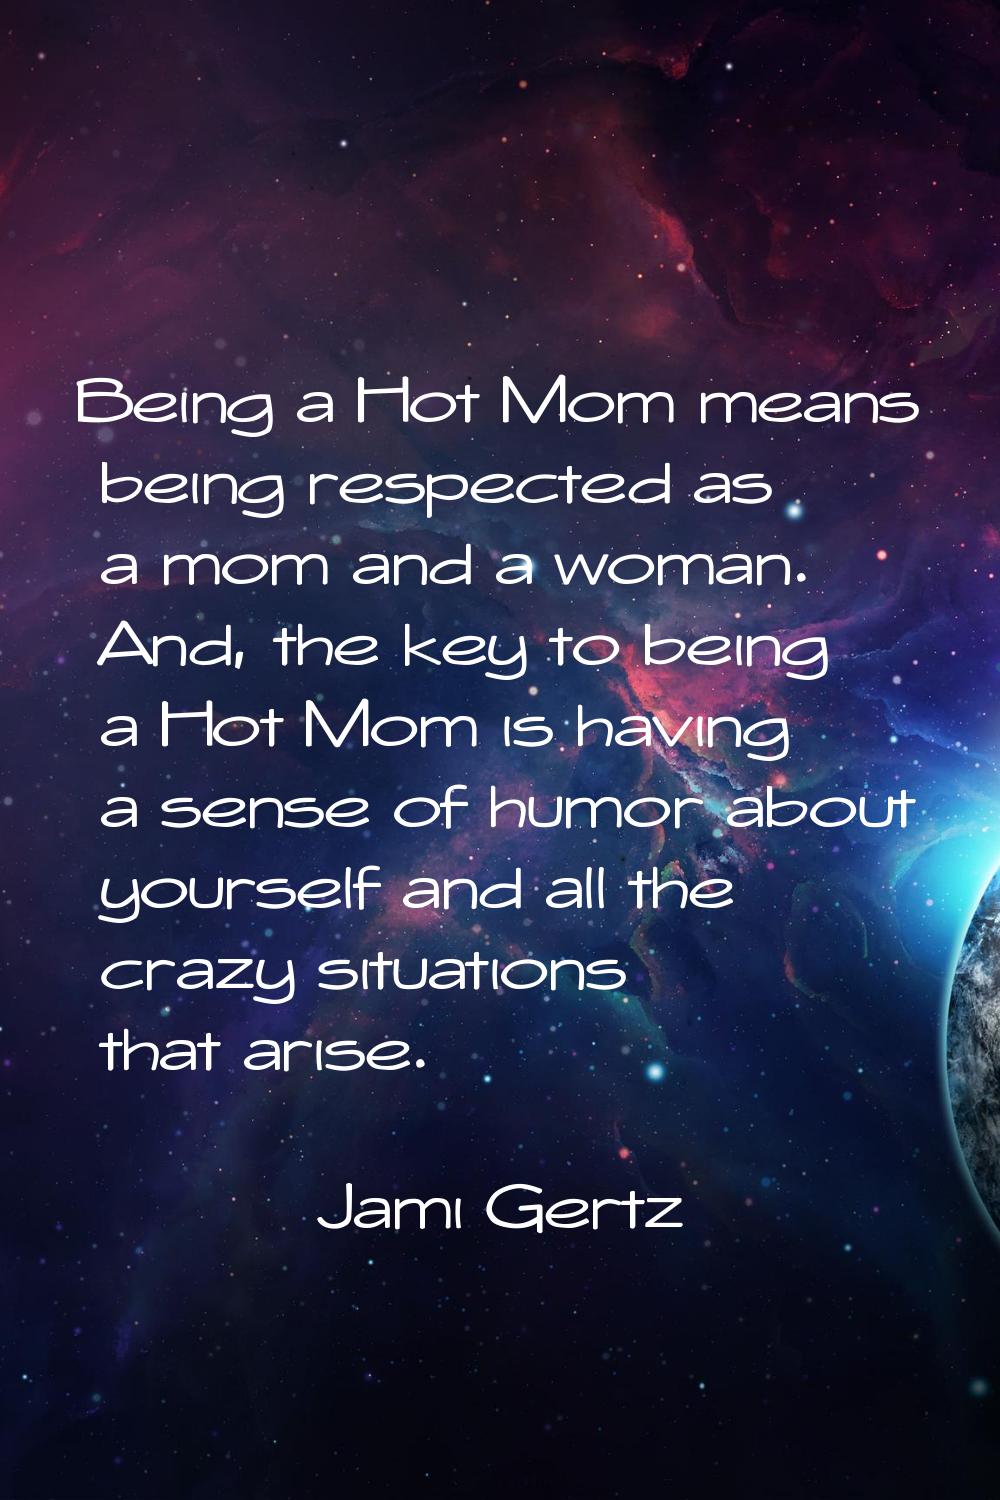 Being a Hot Mom means being respected as a mom and a woman. And, the key to being a Hot Mom is havi